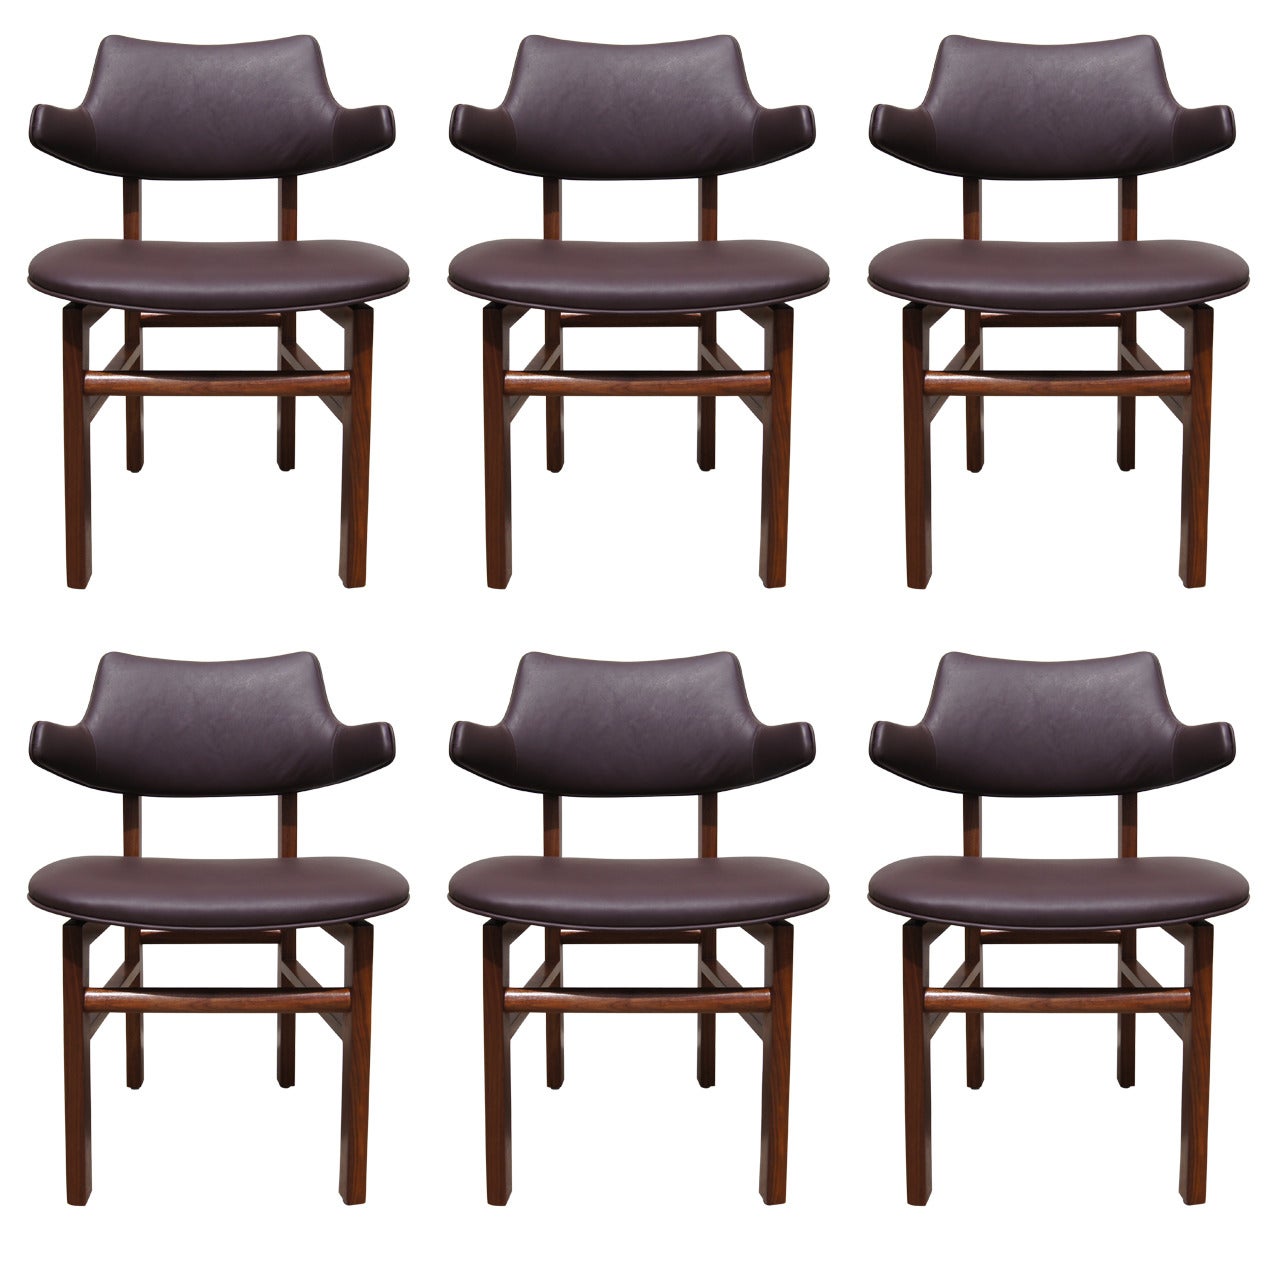 Set of Six Leather and Walnut Dining Chairs by Edward Wormley for Dunbar